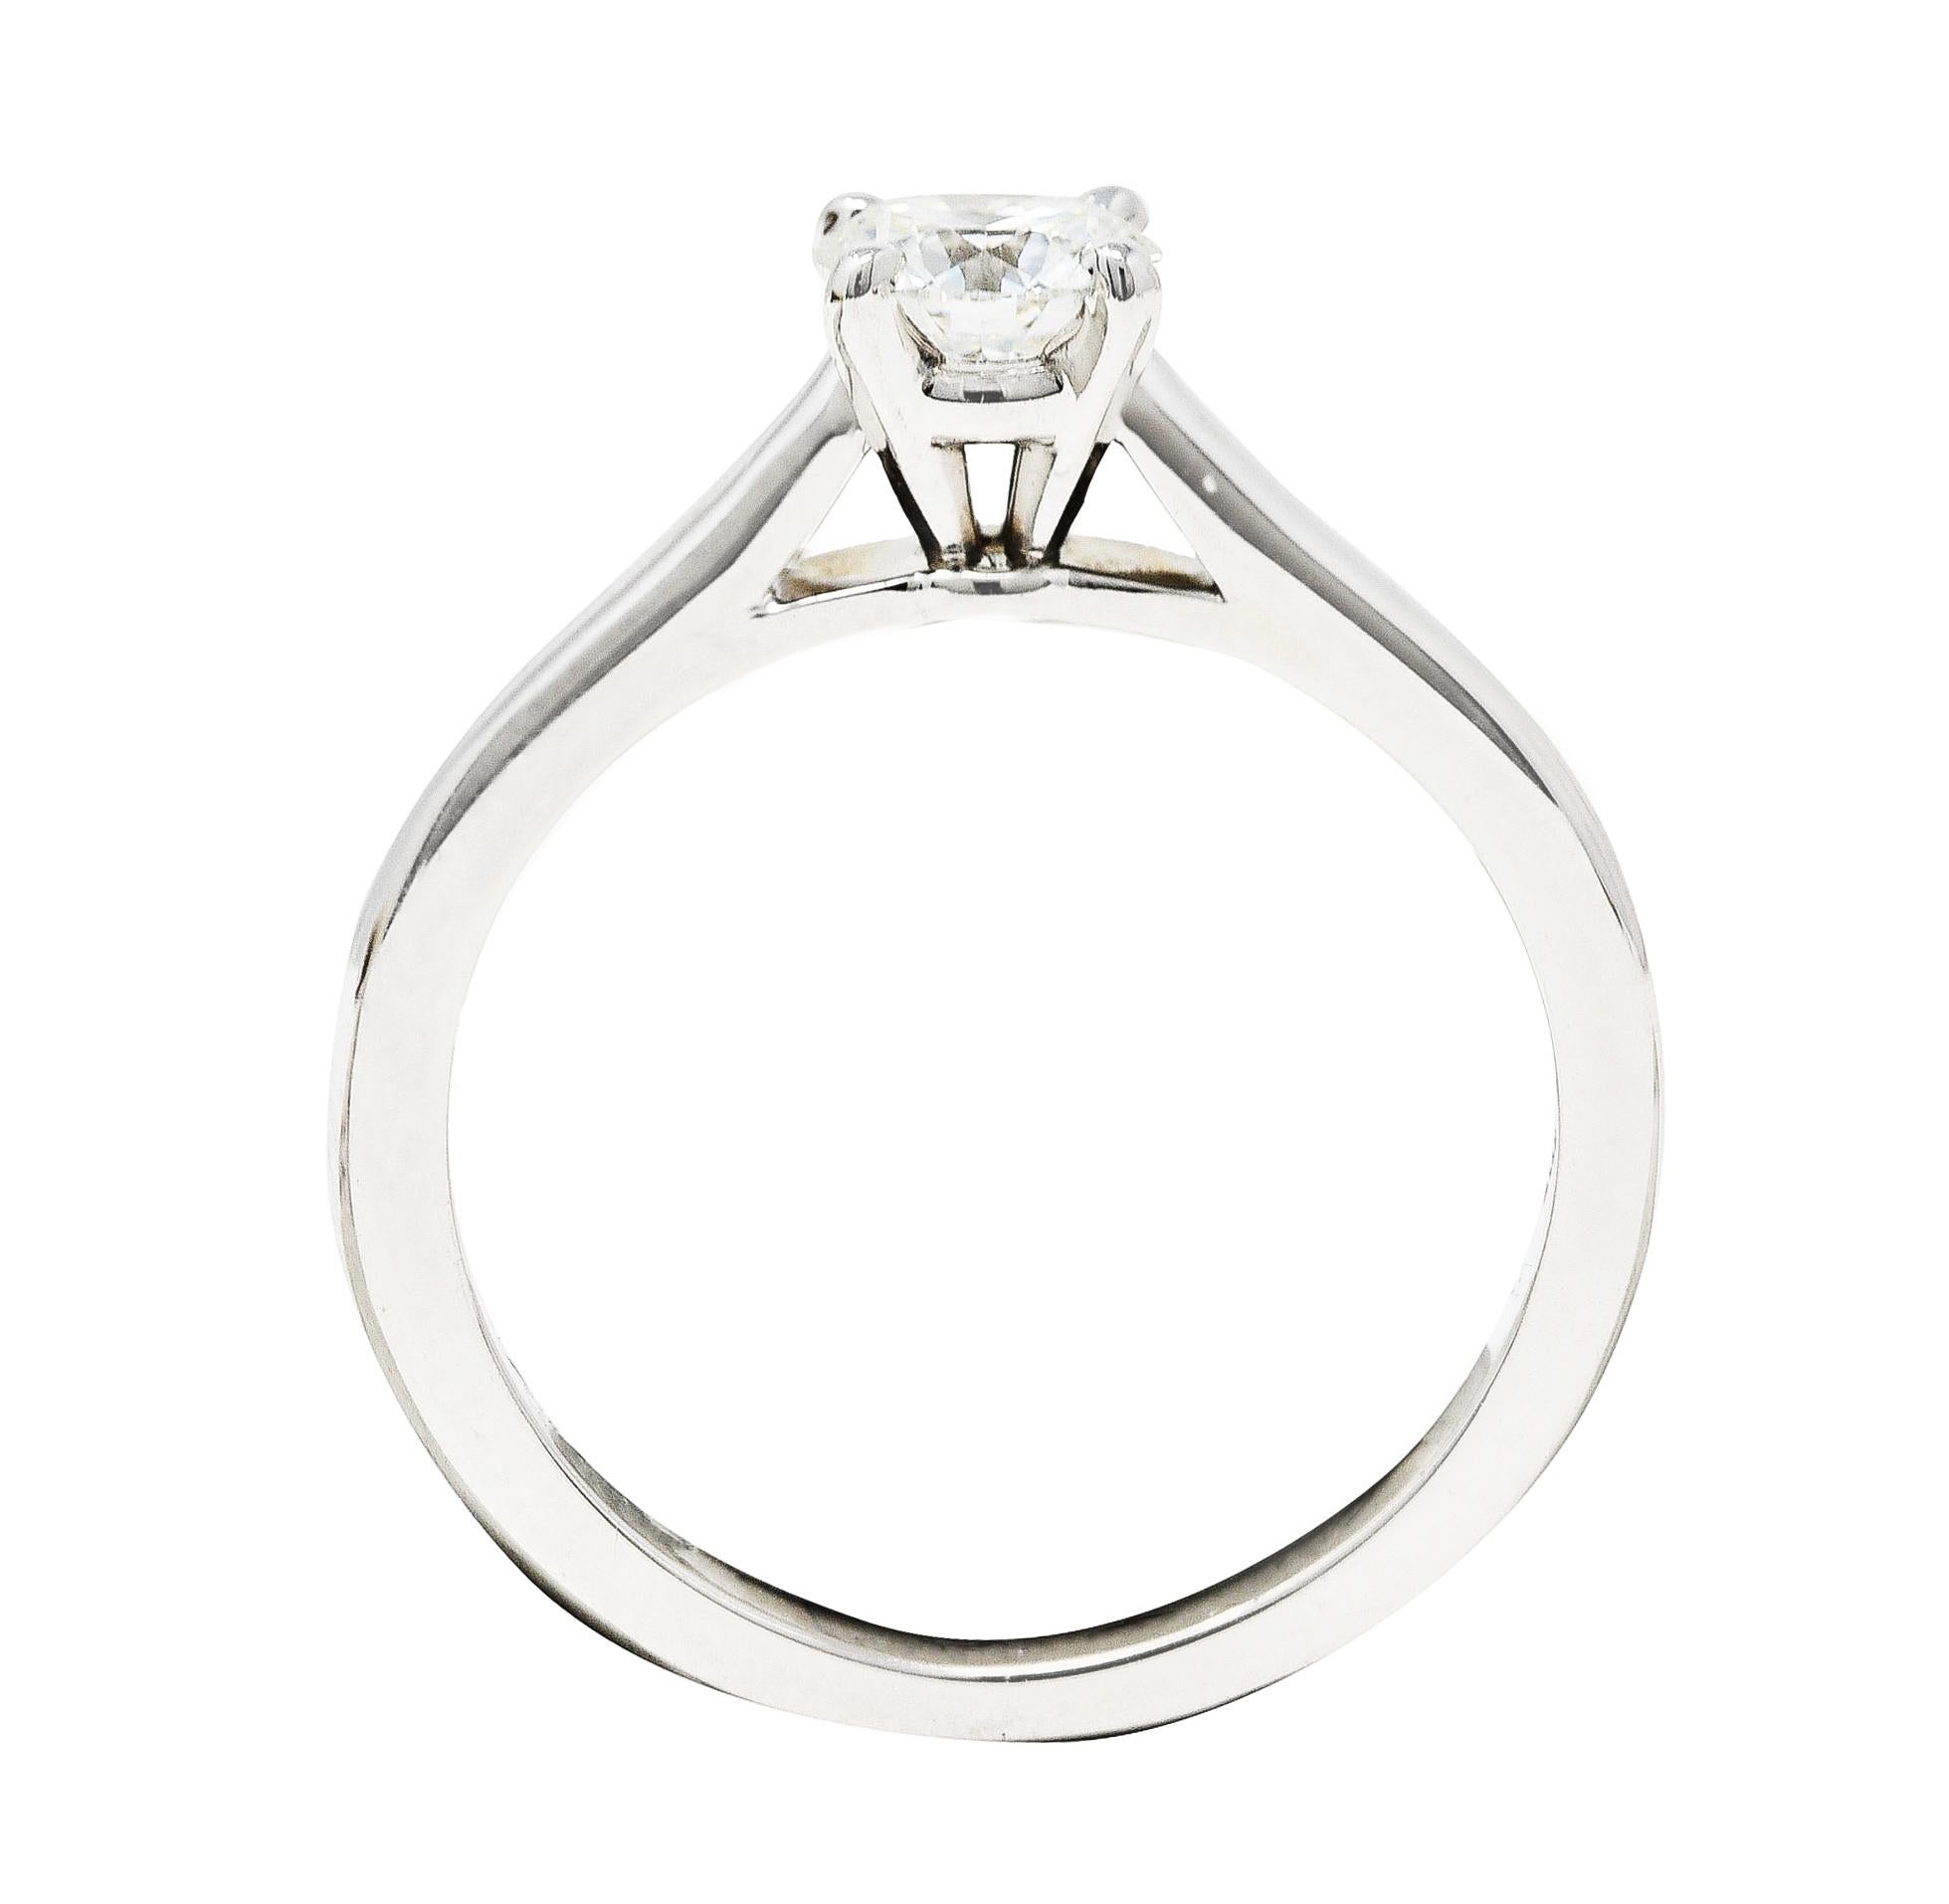 Cartier French Contemporary 0.38 Carat Diamond Platinum Solitaire Ring GIA For Sale 6